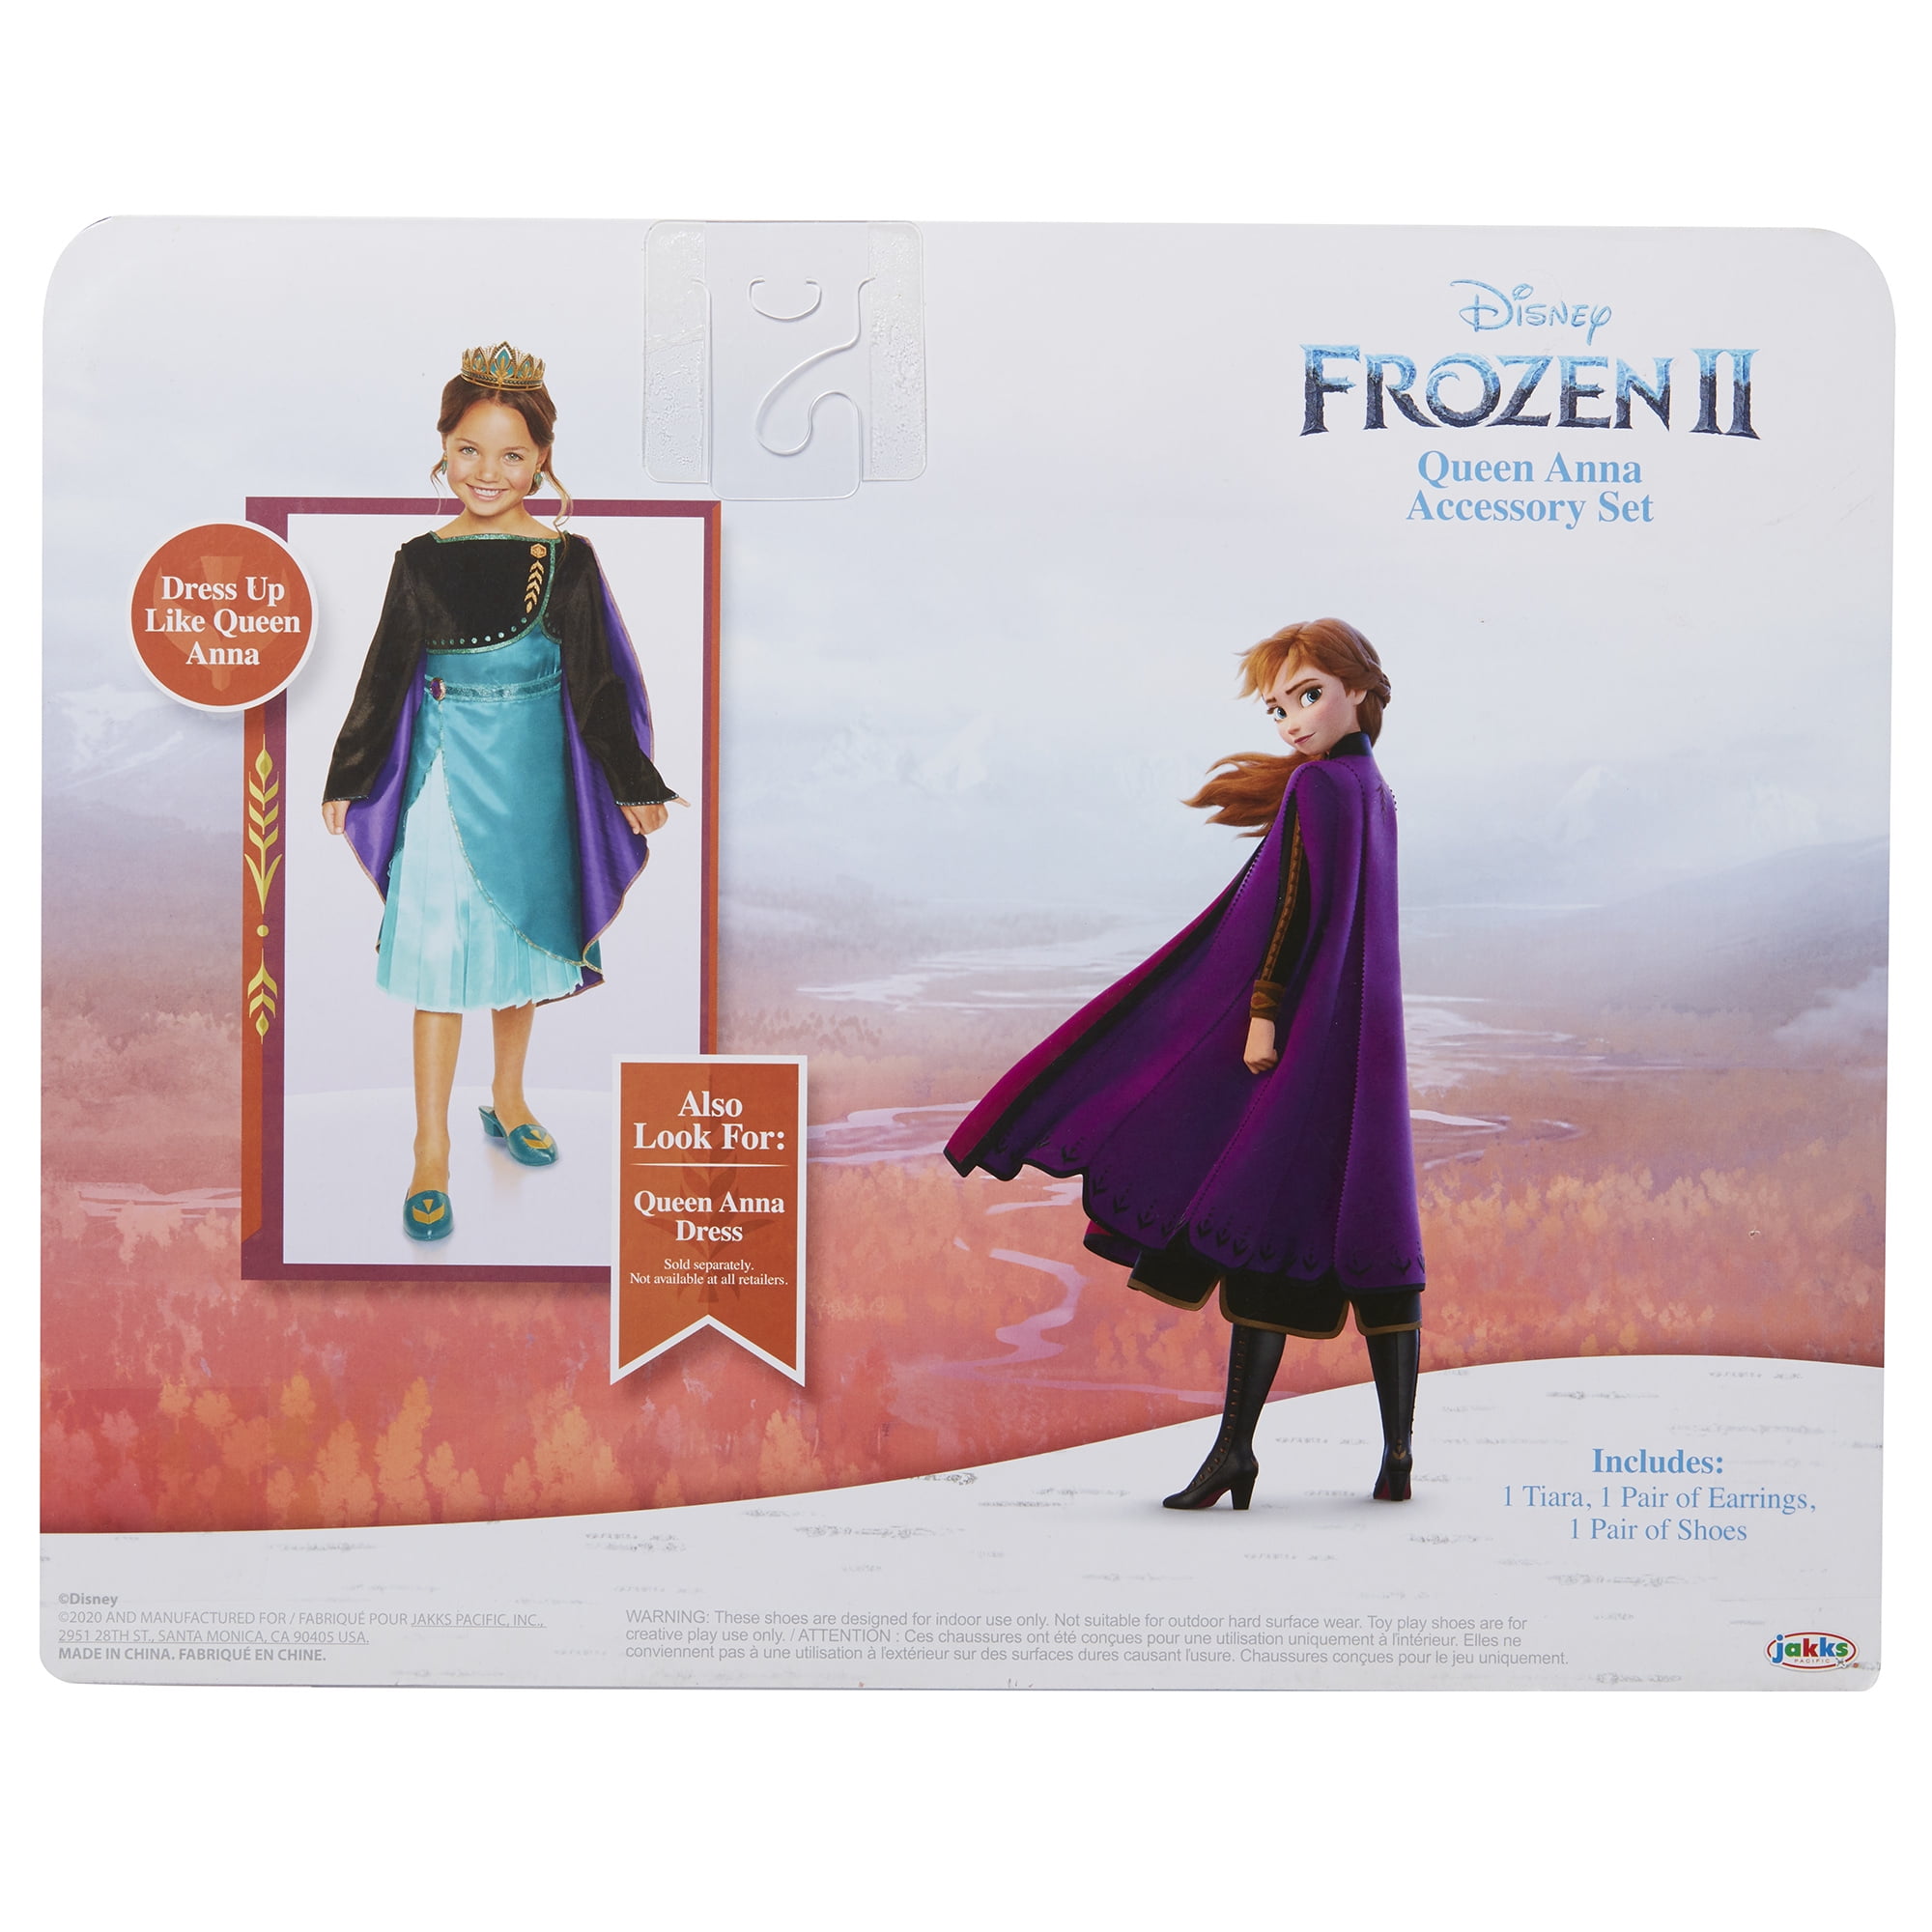 Disney Frozen 2 Queen Anna Accessory Set Includes Shoes Tiara and Earrings Perfect for Costume Dress-Up or Pretend Play 